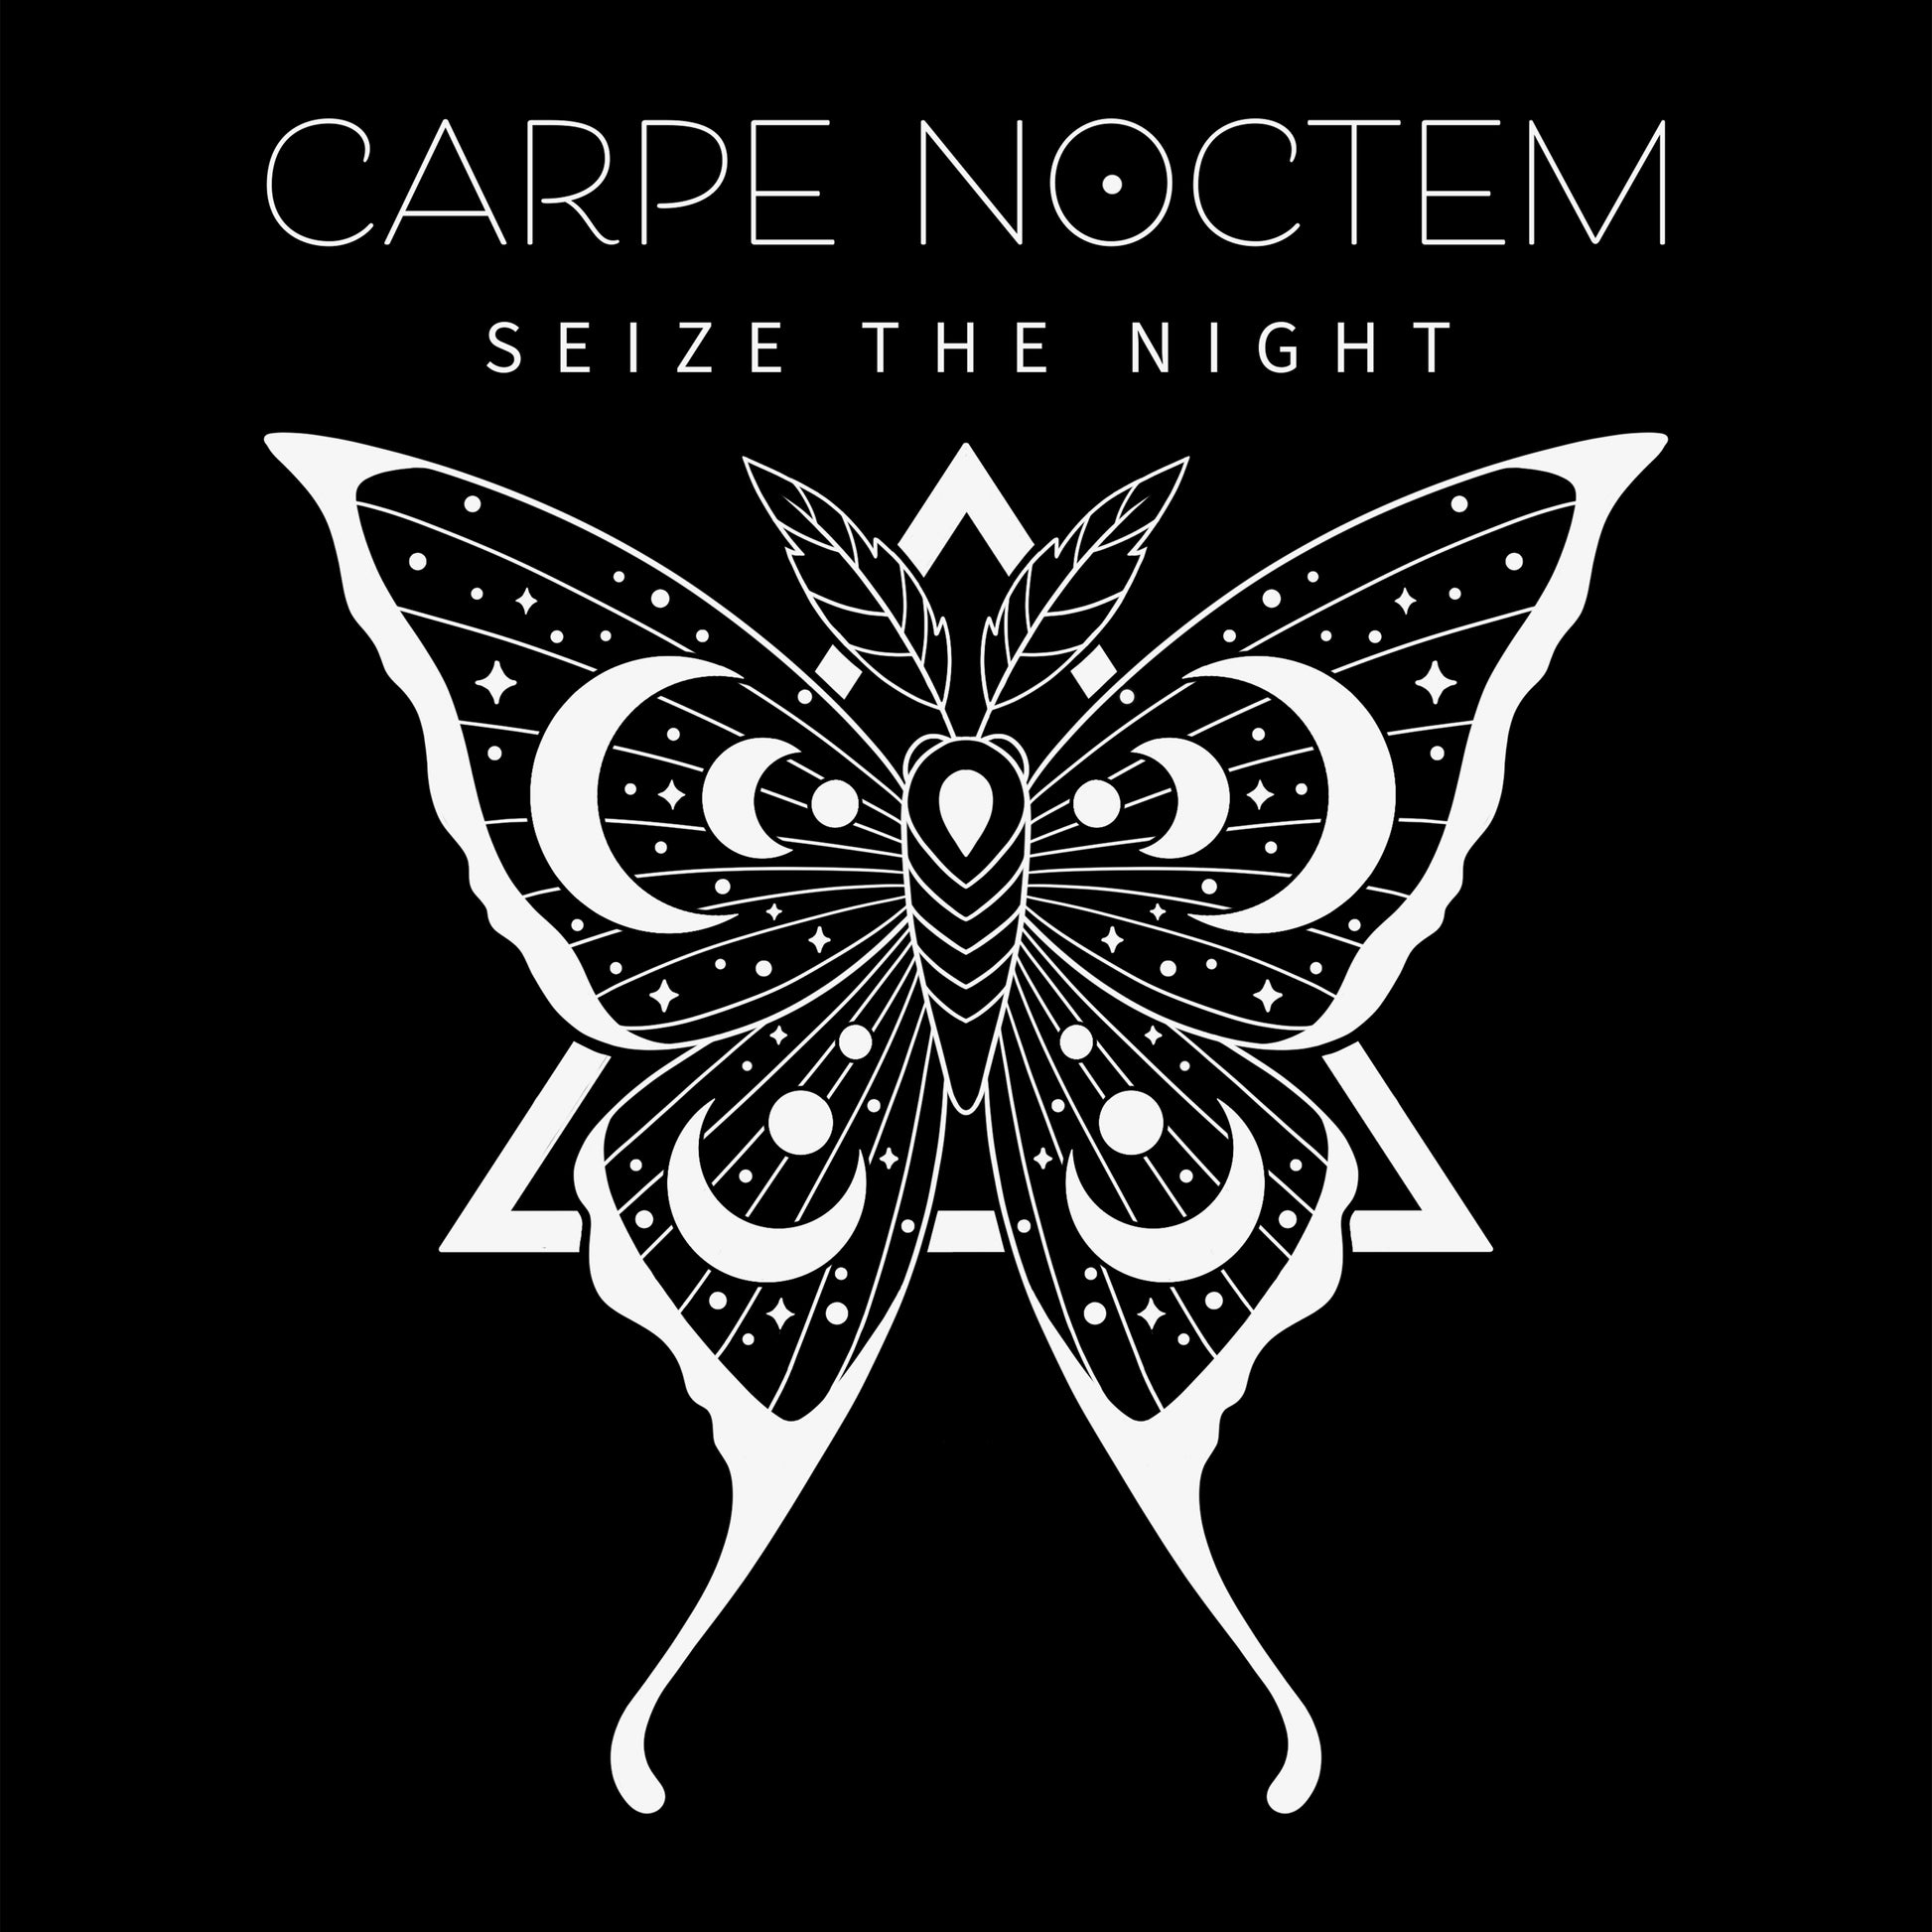 Carpenter seizes the night with a Carpe Noctem t-shirt from TeeTurtle.